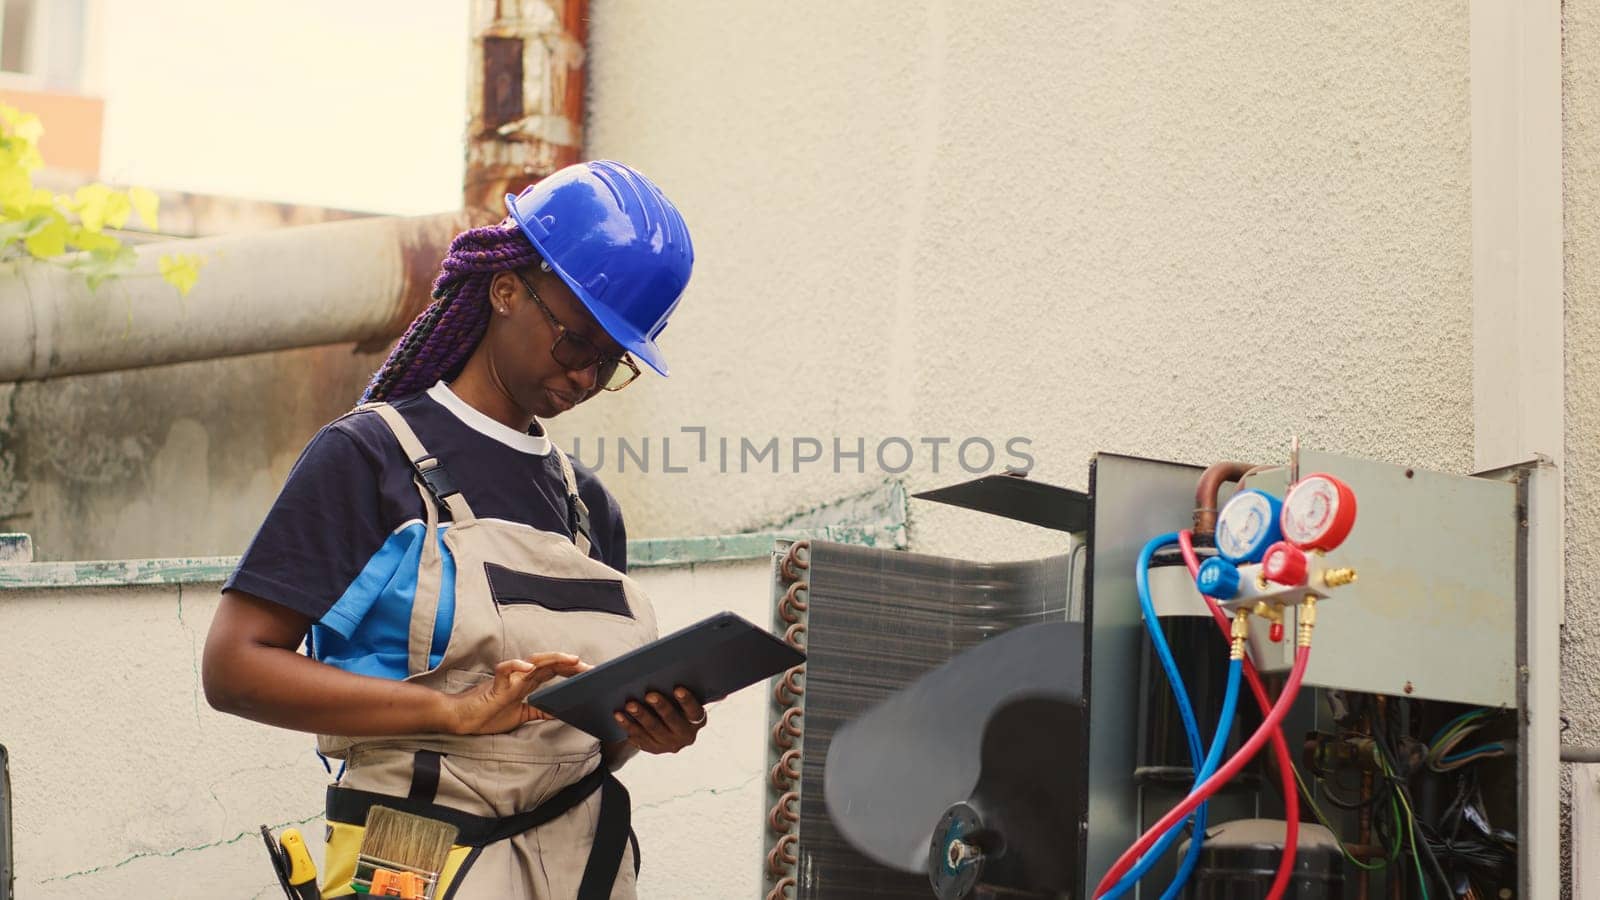 Seasoned mechanic servicing external condenser internal parts, checking refrigerant level and calibrating thermostats. Capable electrician imputing maintenance results data on laptop